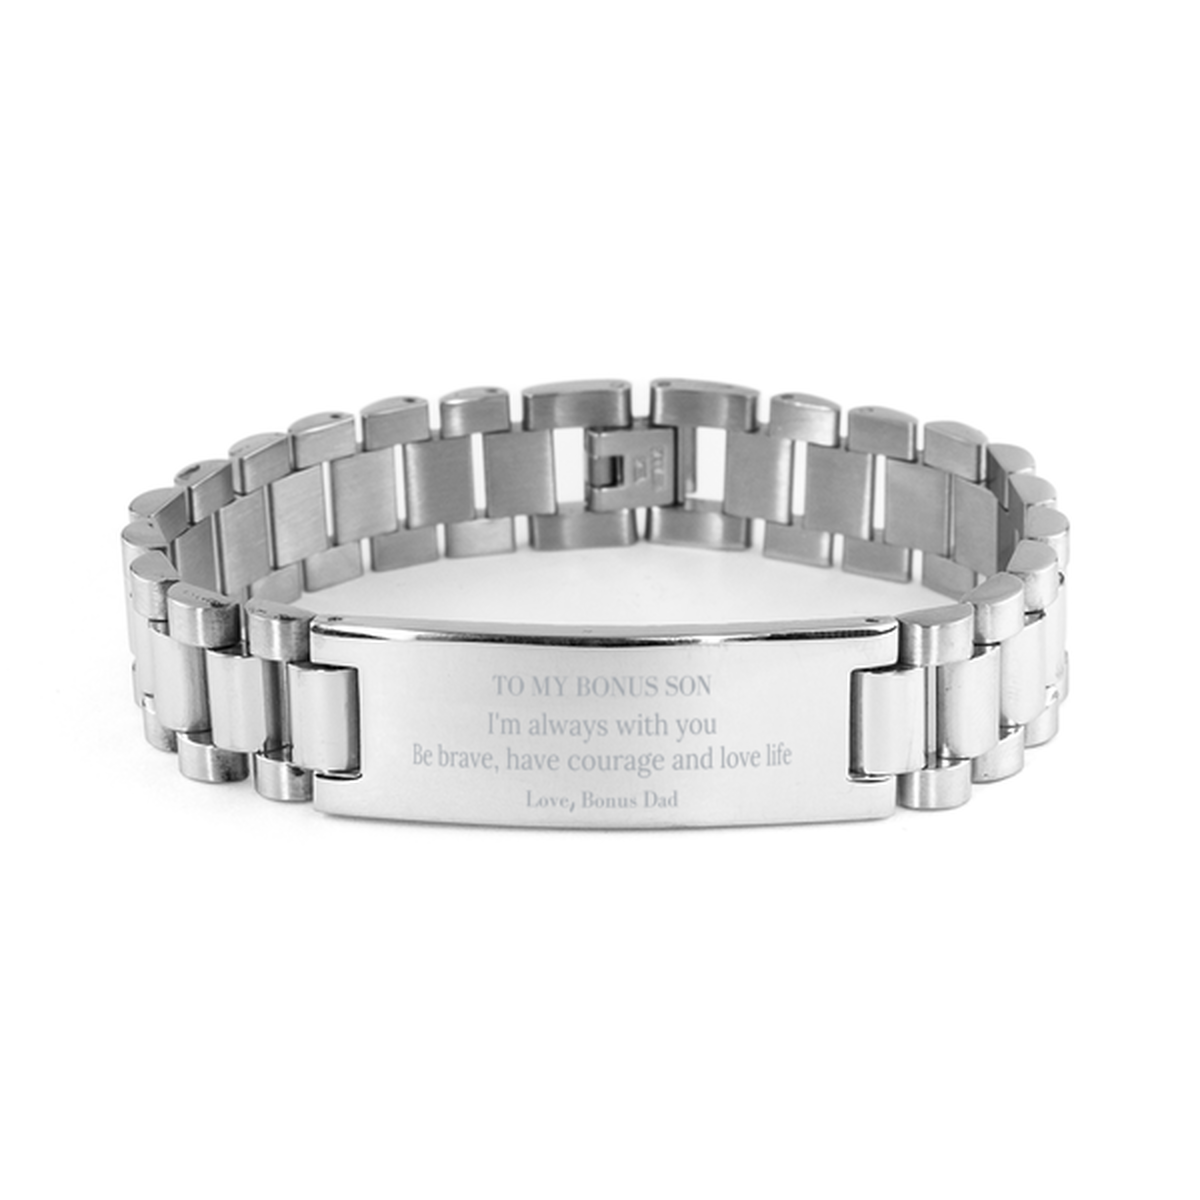 To My Bonus Son Gifts from Bonus Dad, Unique Ladder Stainless Steel Bracelet Inspirational Christmas Birthday Graduation Gifts for Bonus Son I'm always with you. Be brave, have courage and love life. Love, Bonus Dad